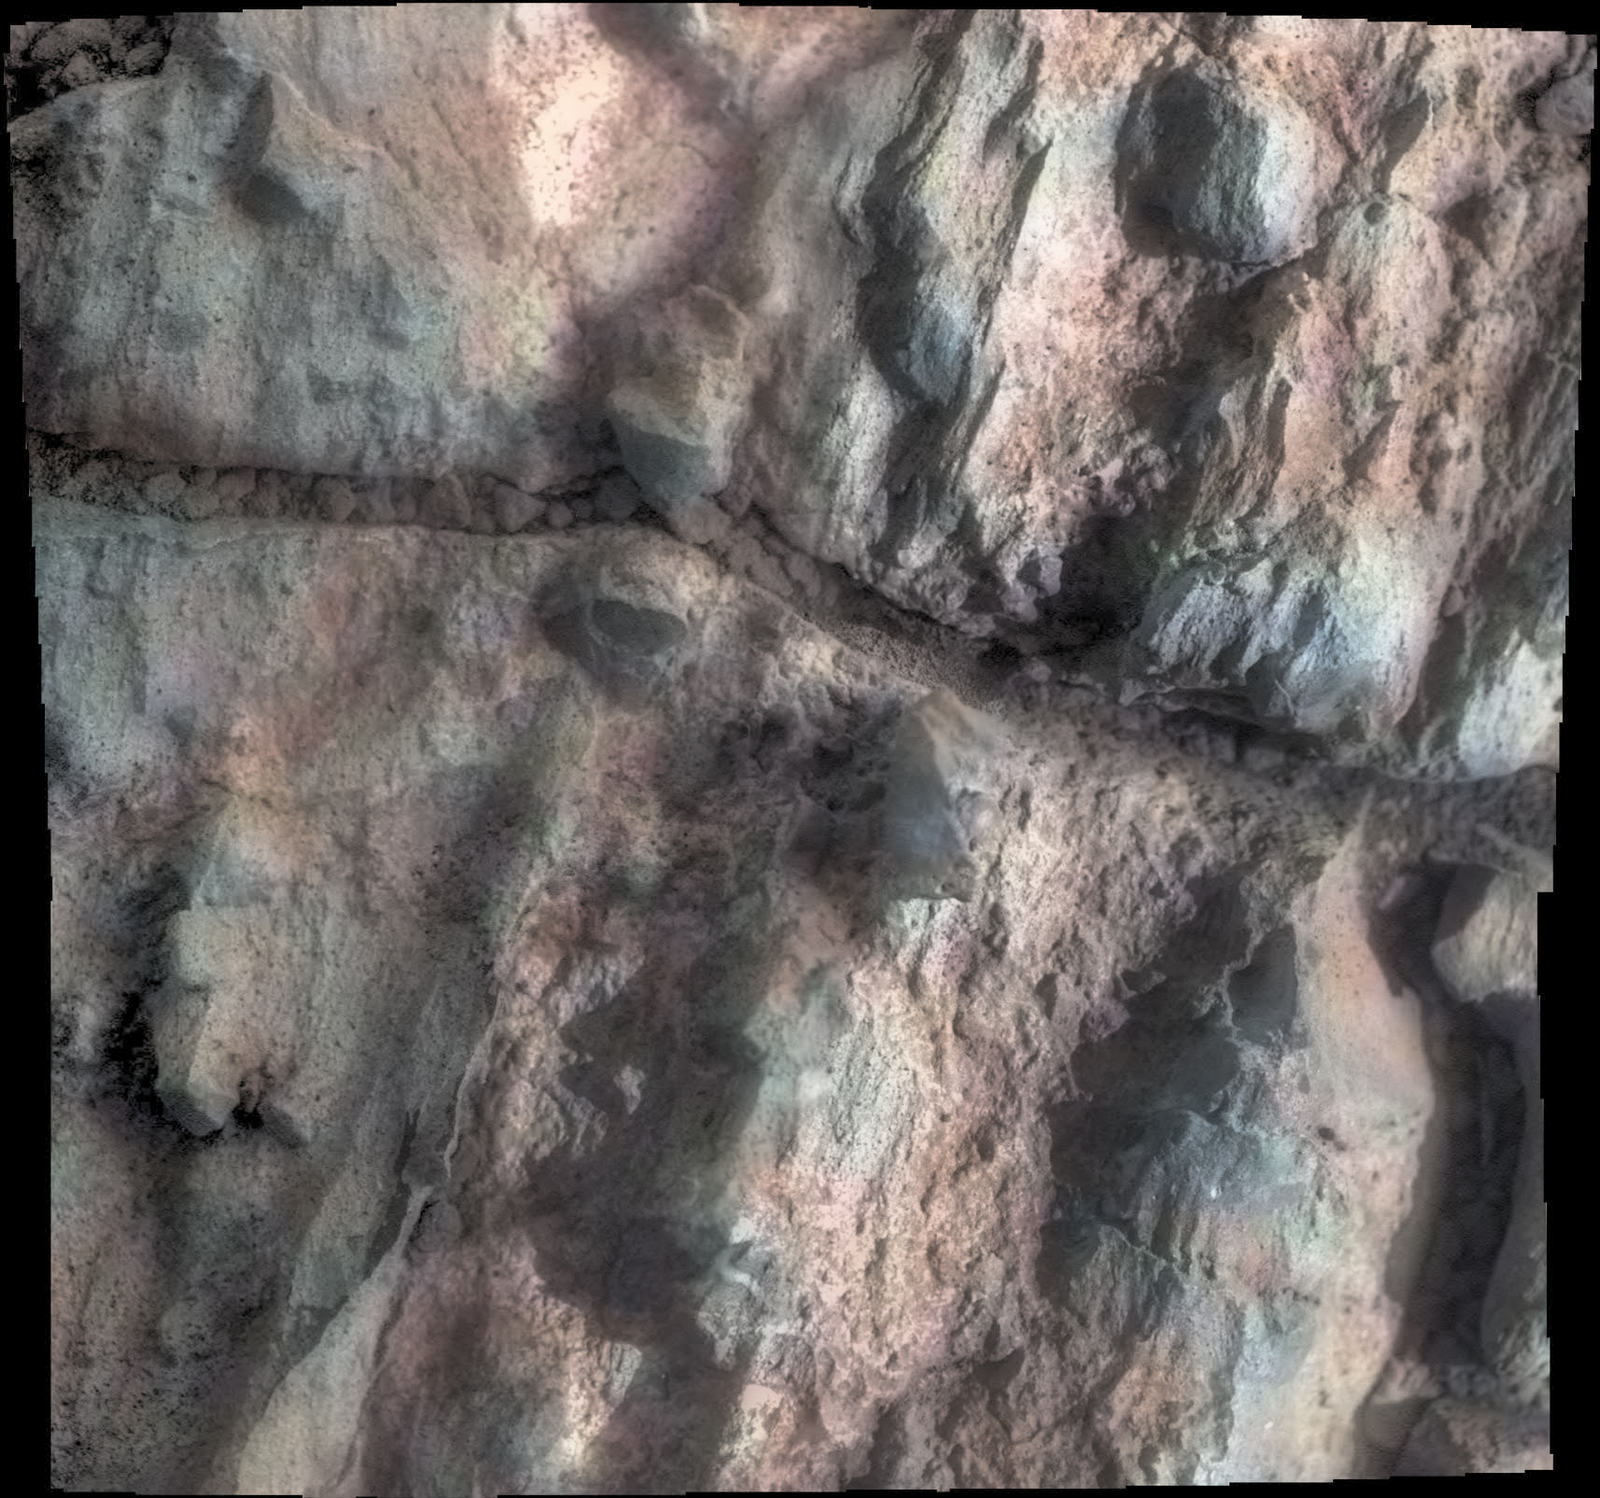 This rock, dubbed "Gasconade," was investigated by NASA's Mars Exploration Rover Opportunity while the rover was perched on "Spirit Mound" at the western edge of Mars' Endeavour Crater. Four Oct. 2, 2016, frames from Opportunity's microscopic imager are joined in this mosaic view.